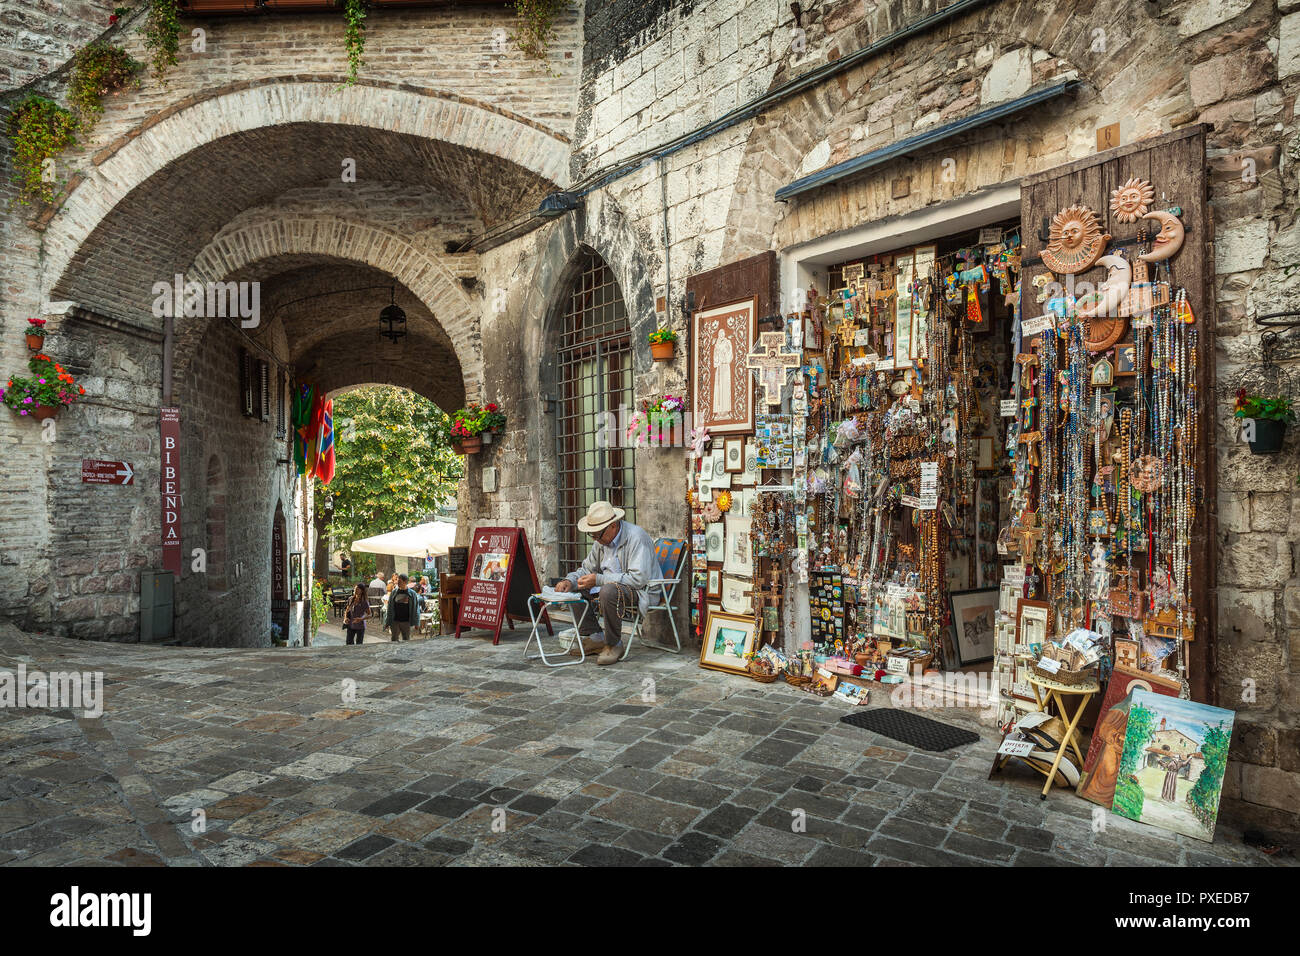 Souvenir shop in a street in Assisi. Perugia, Umbria, Italy Stock Photo